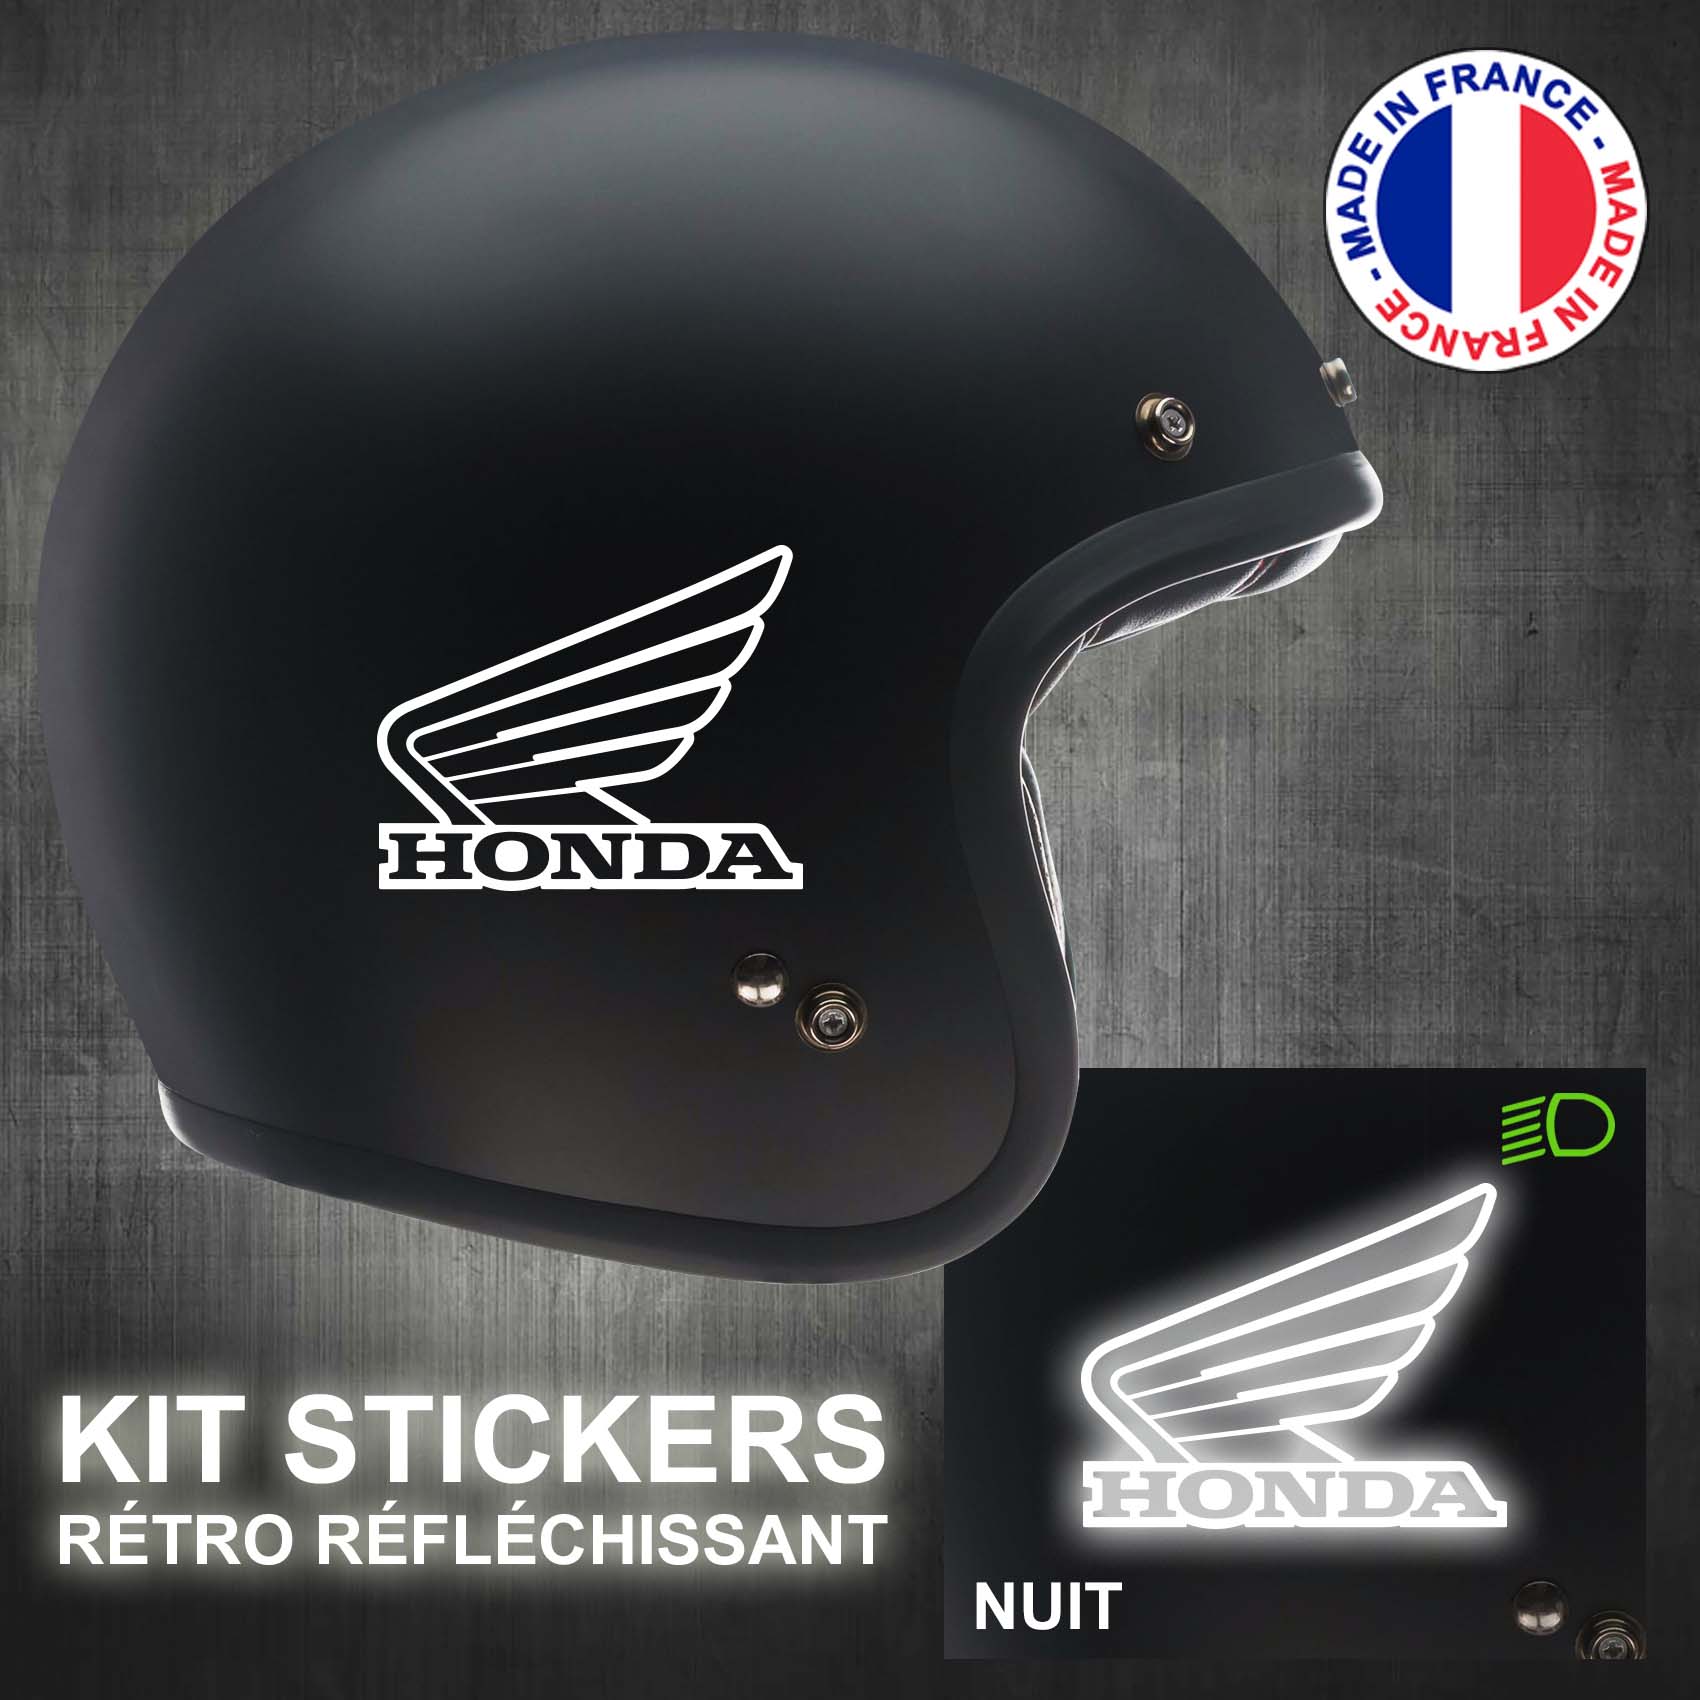 stickers-casque-moto-honda-ref4-retro-reflechissant-autocollant-noir-moto-velo-tuning-racing-route-sticker-casques-adhesif-scooter-nuit-securite-decals-personnalise-personnalisable-min